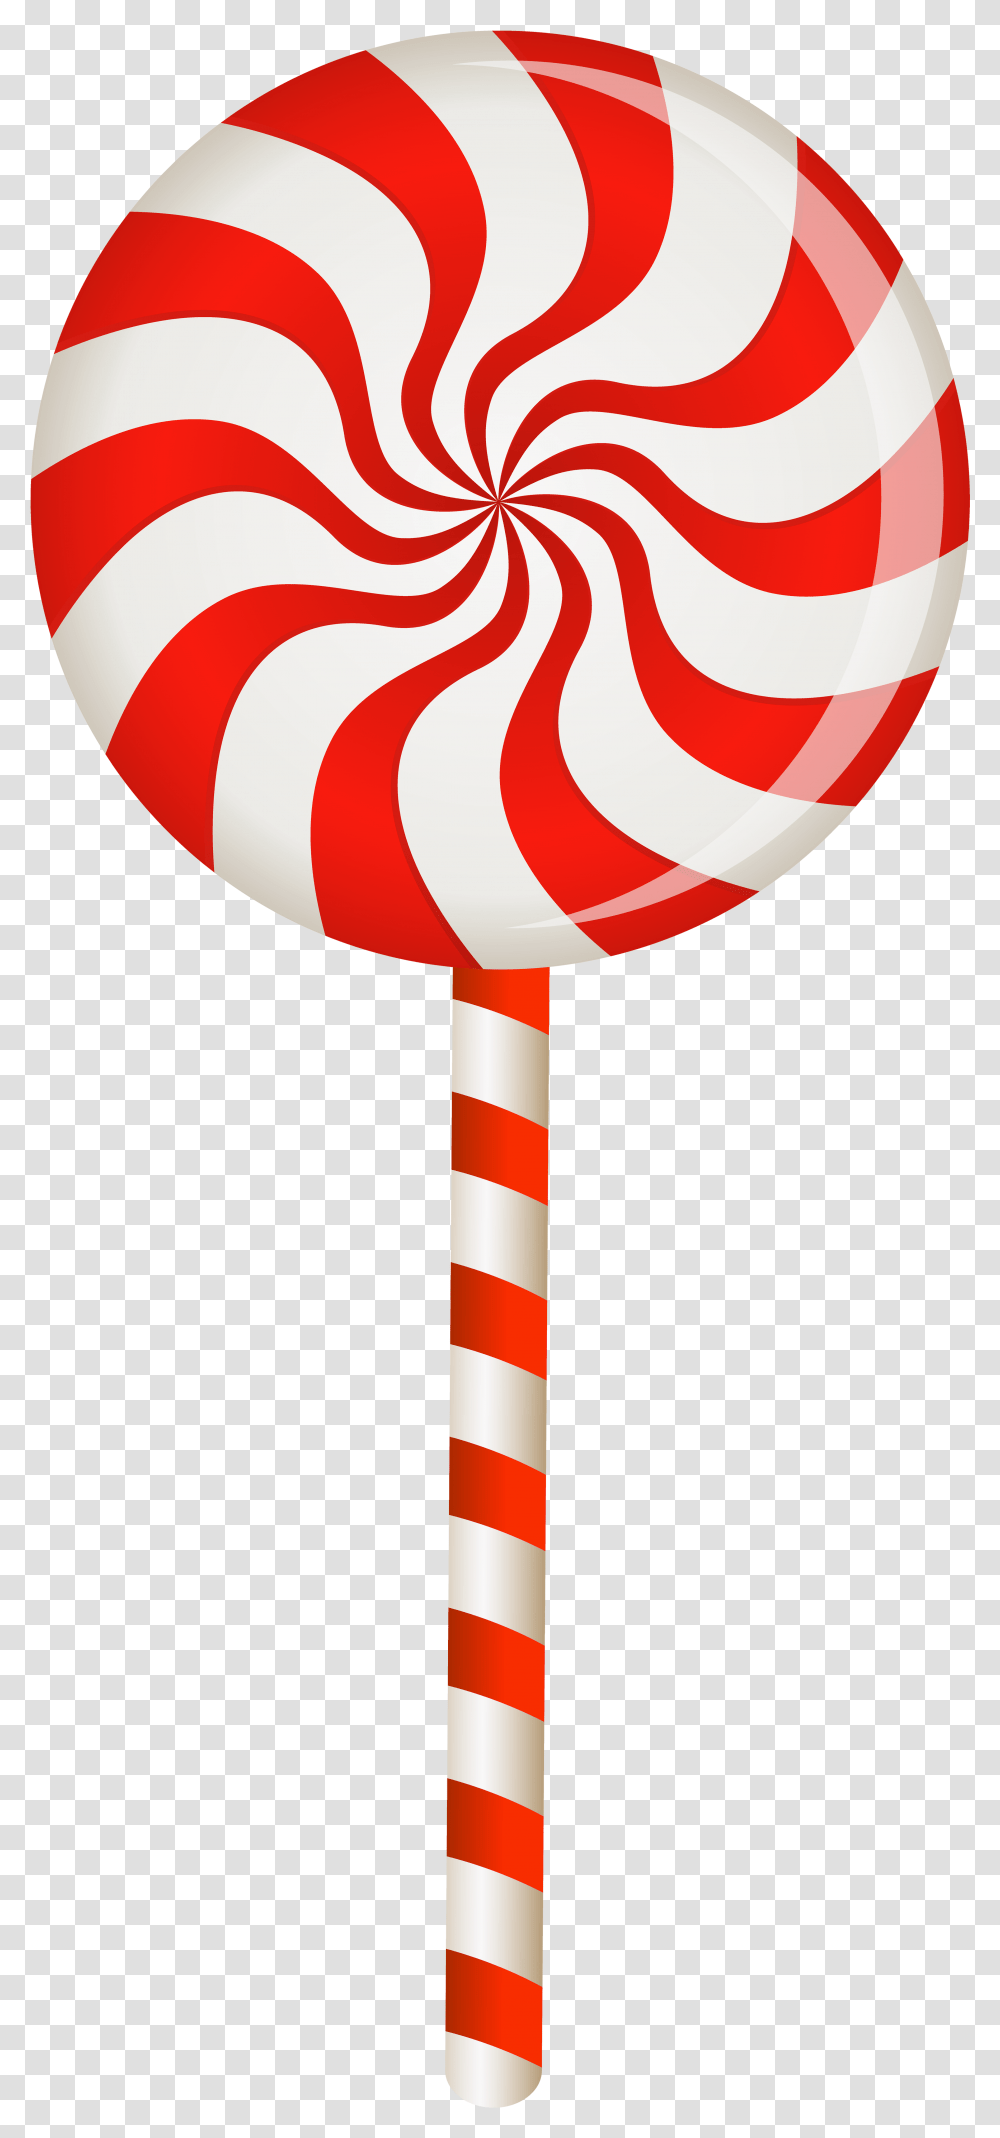 Background Lollipop Clipart Lollipop Clipart No Background, Food, Sweets, Confectionery, Candy Transparent Png